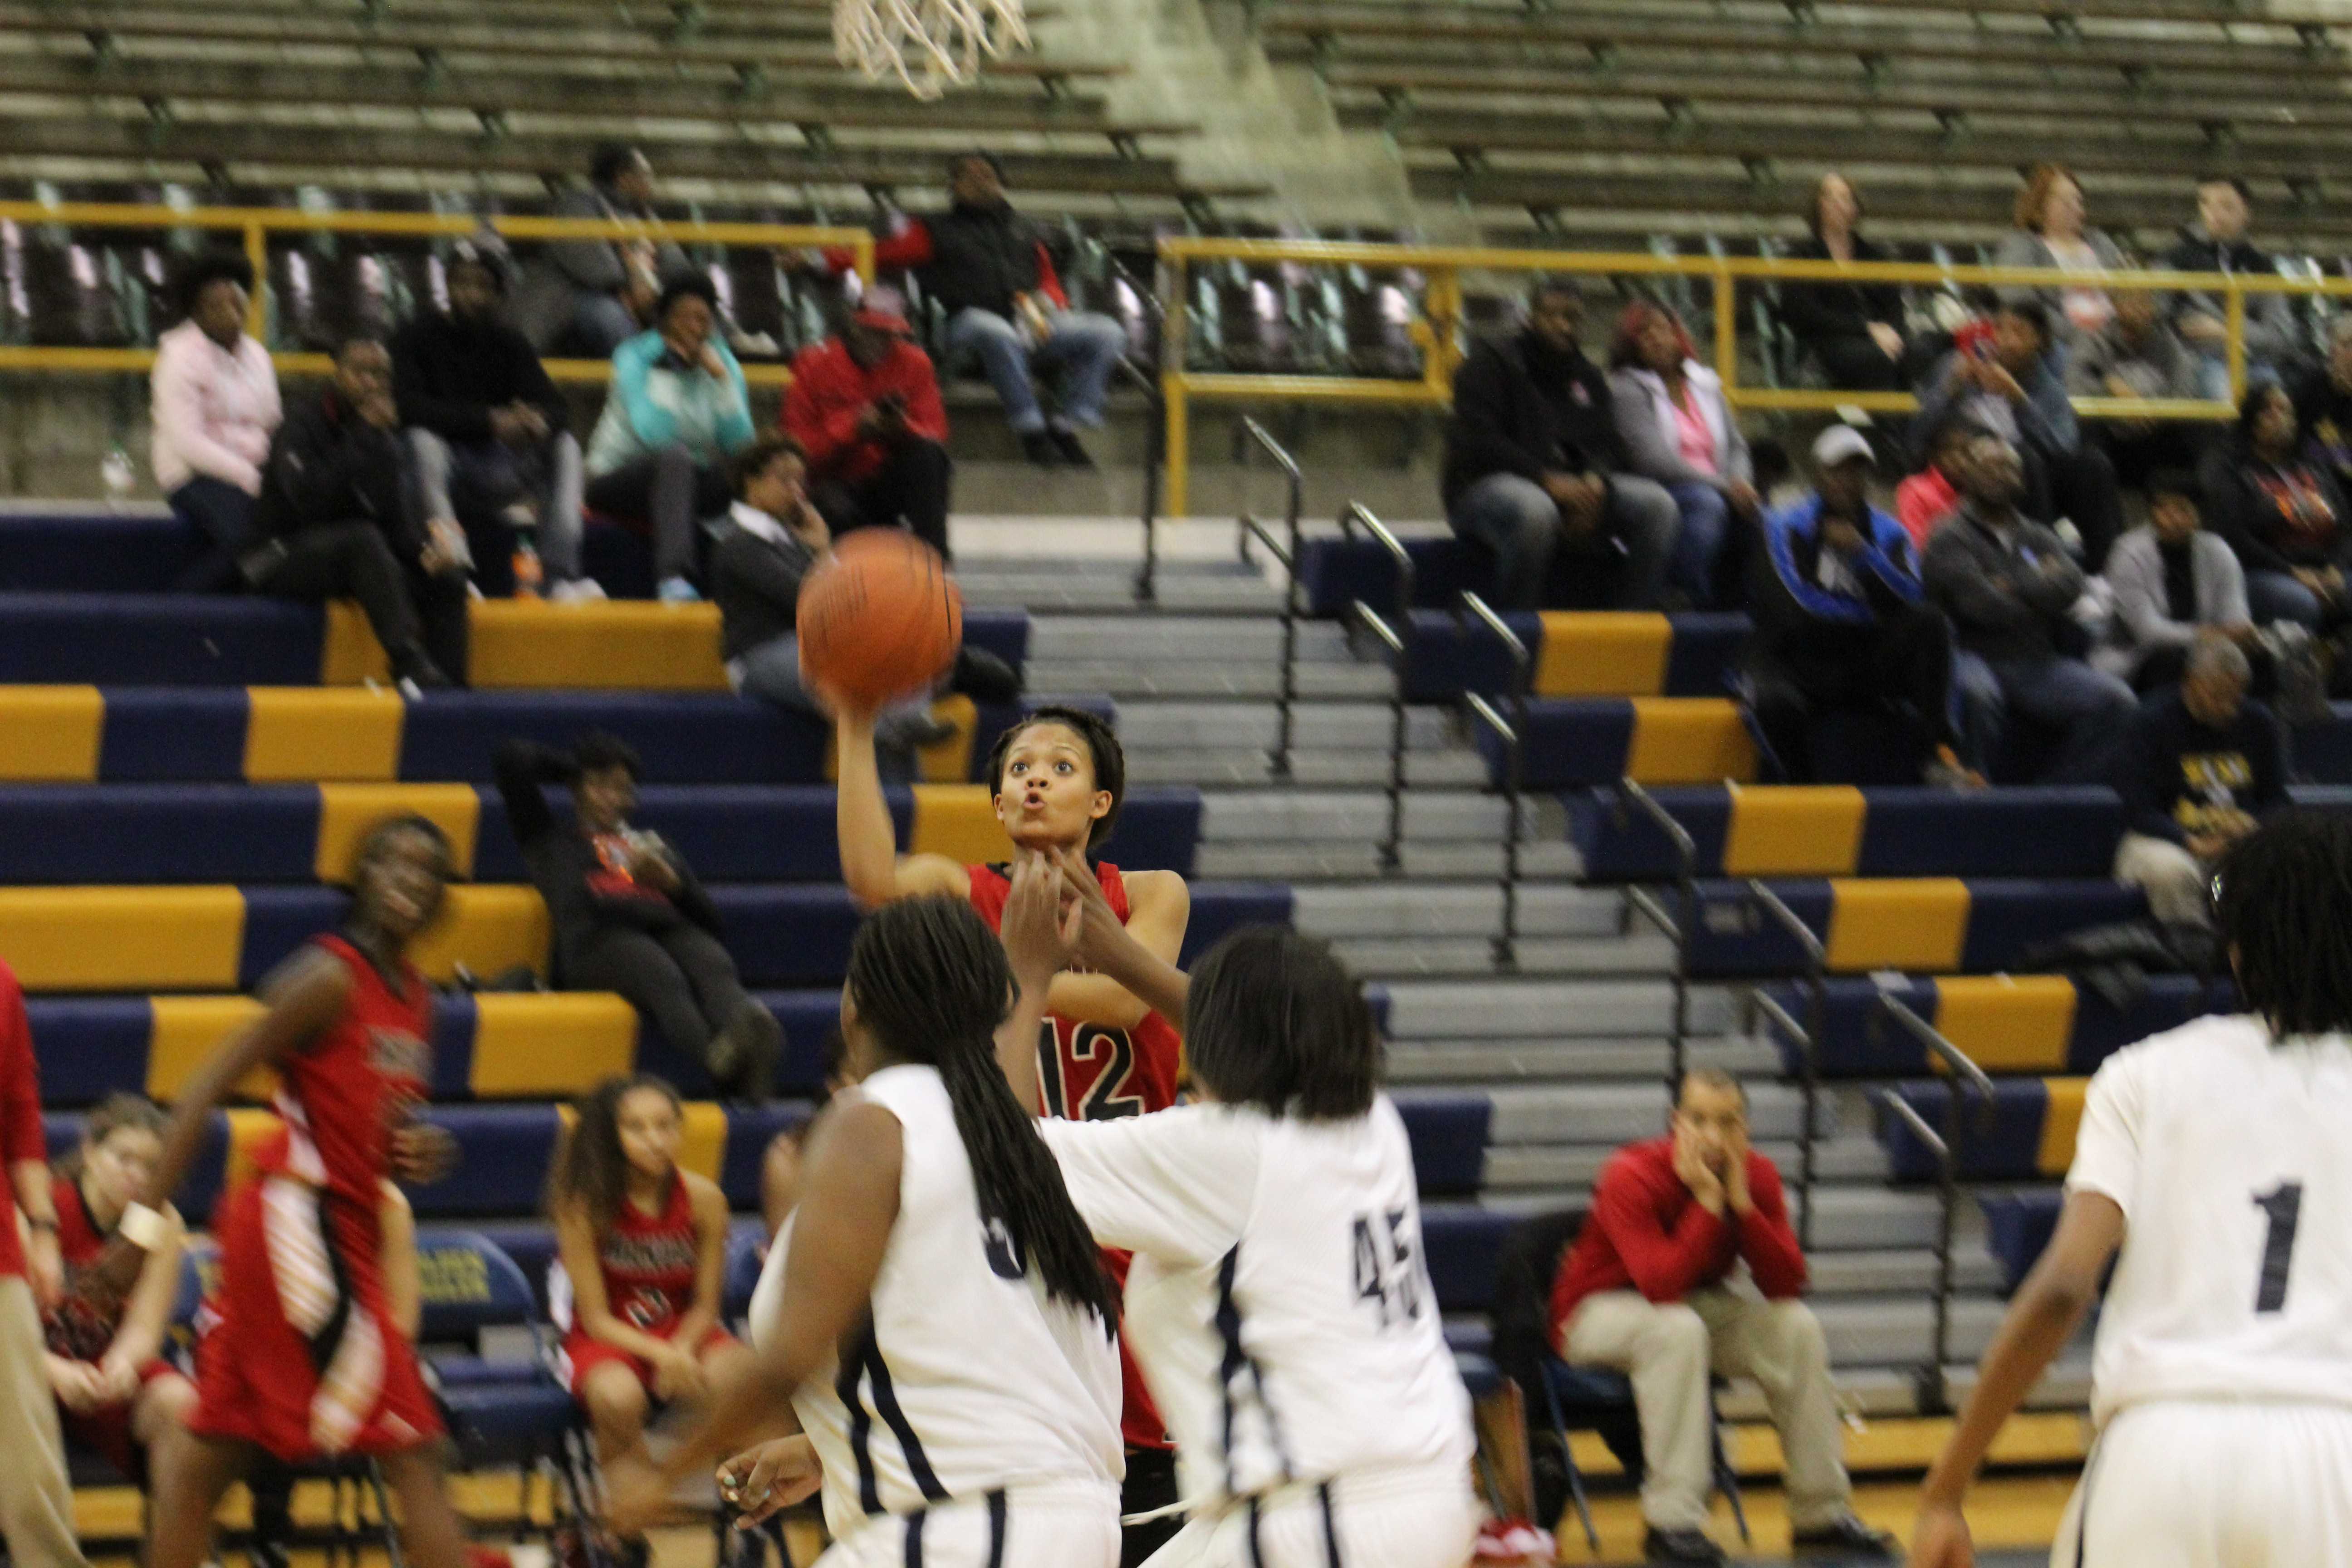 Tyonne Howard (12, #12) attempts a lay up. Photo by Kate Hatter